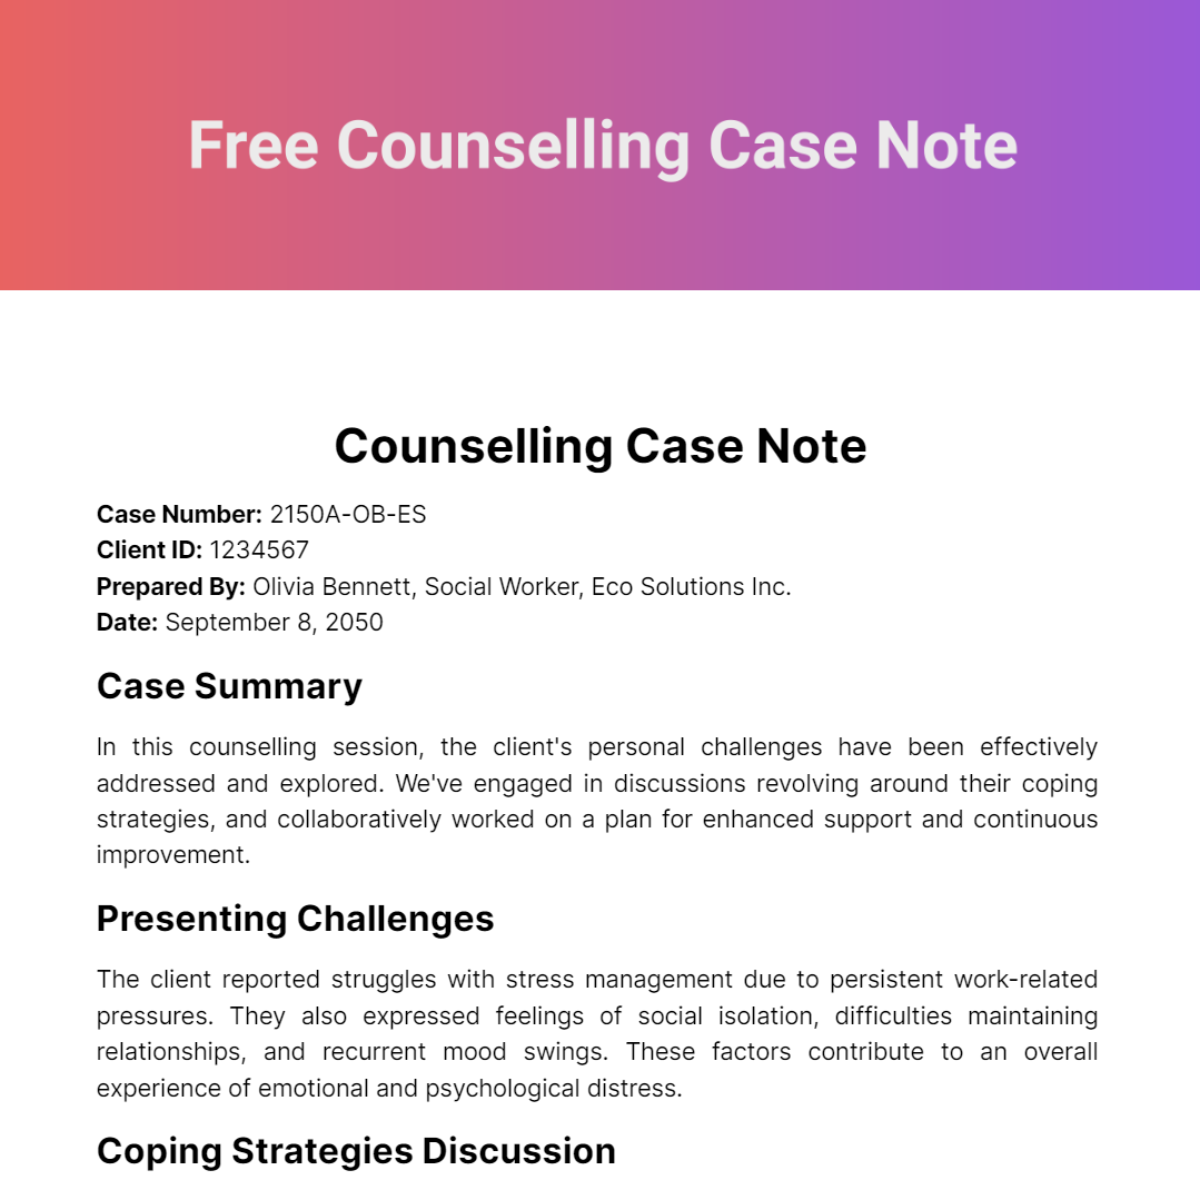 Free Counselling Case Note Template